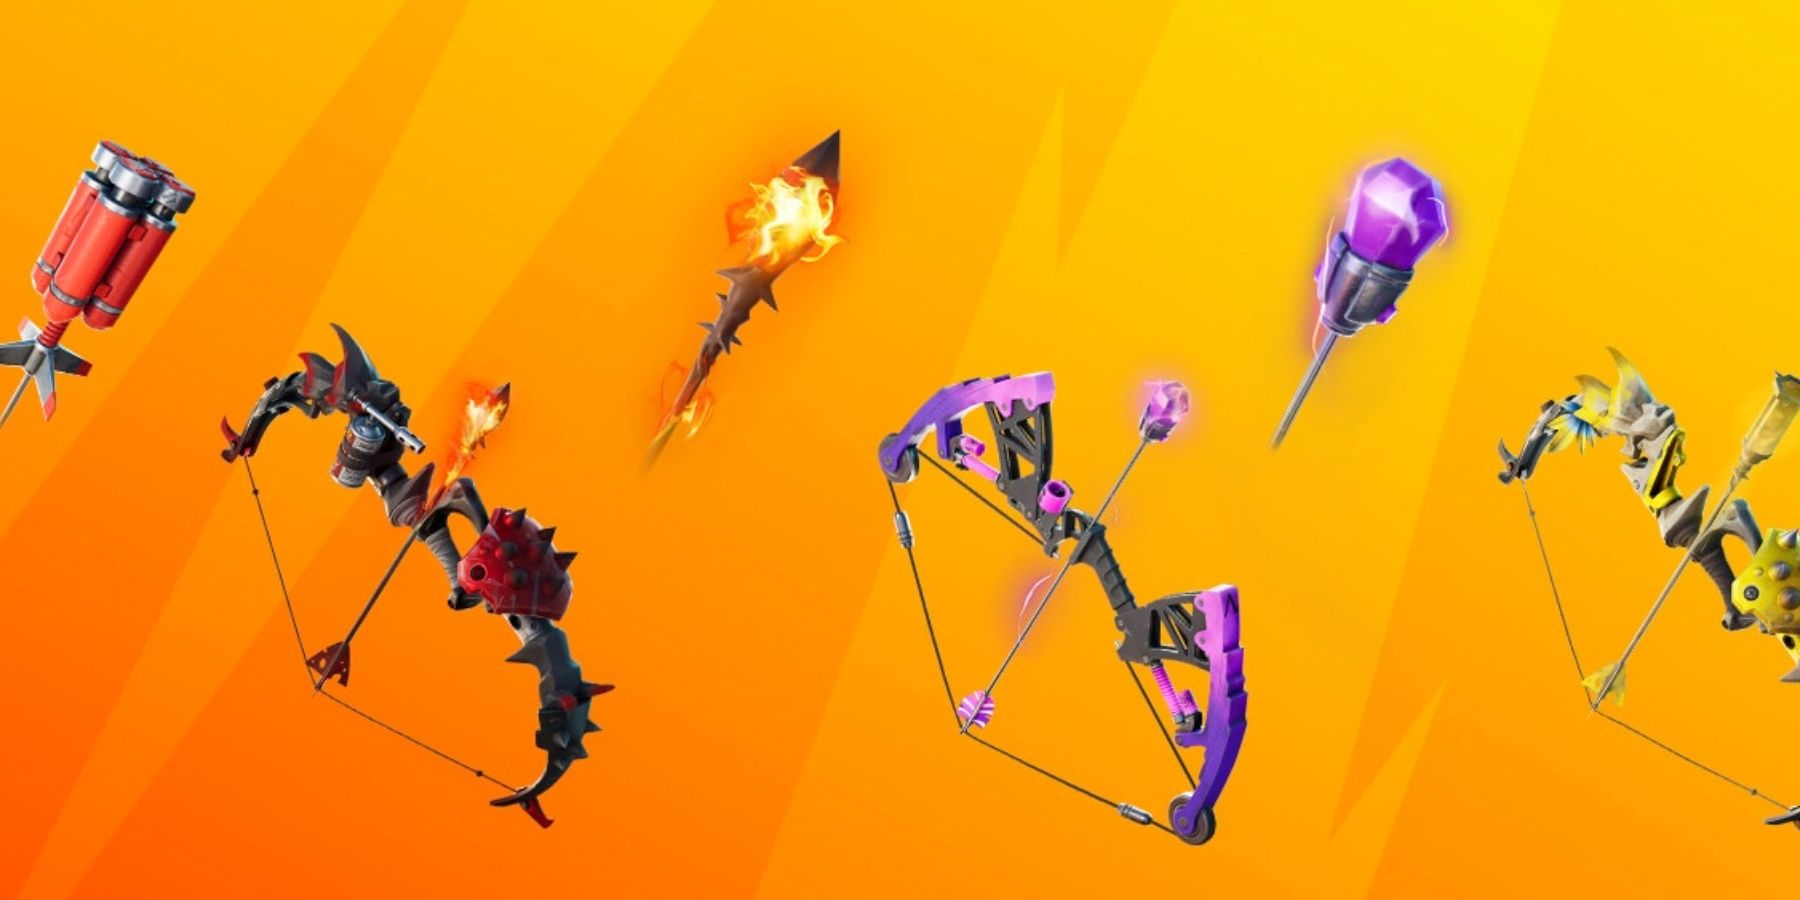 fortnite chapter 3 season 1 bows bownanza event challenges quests